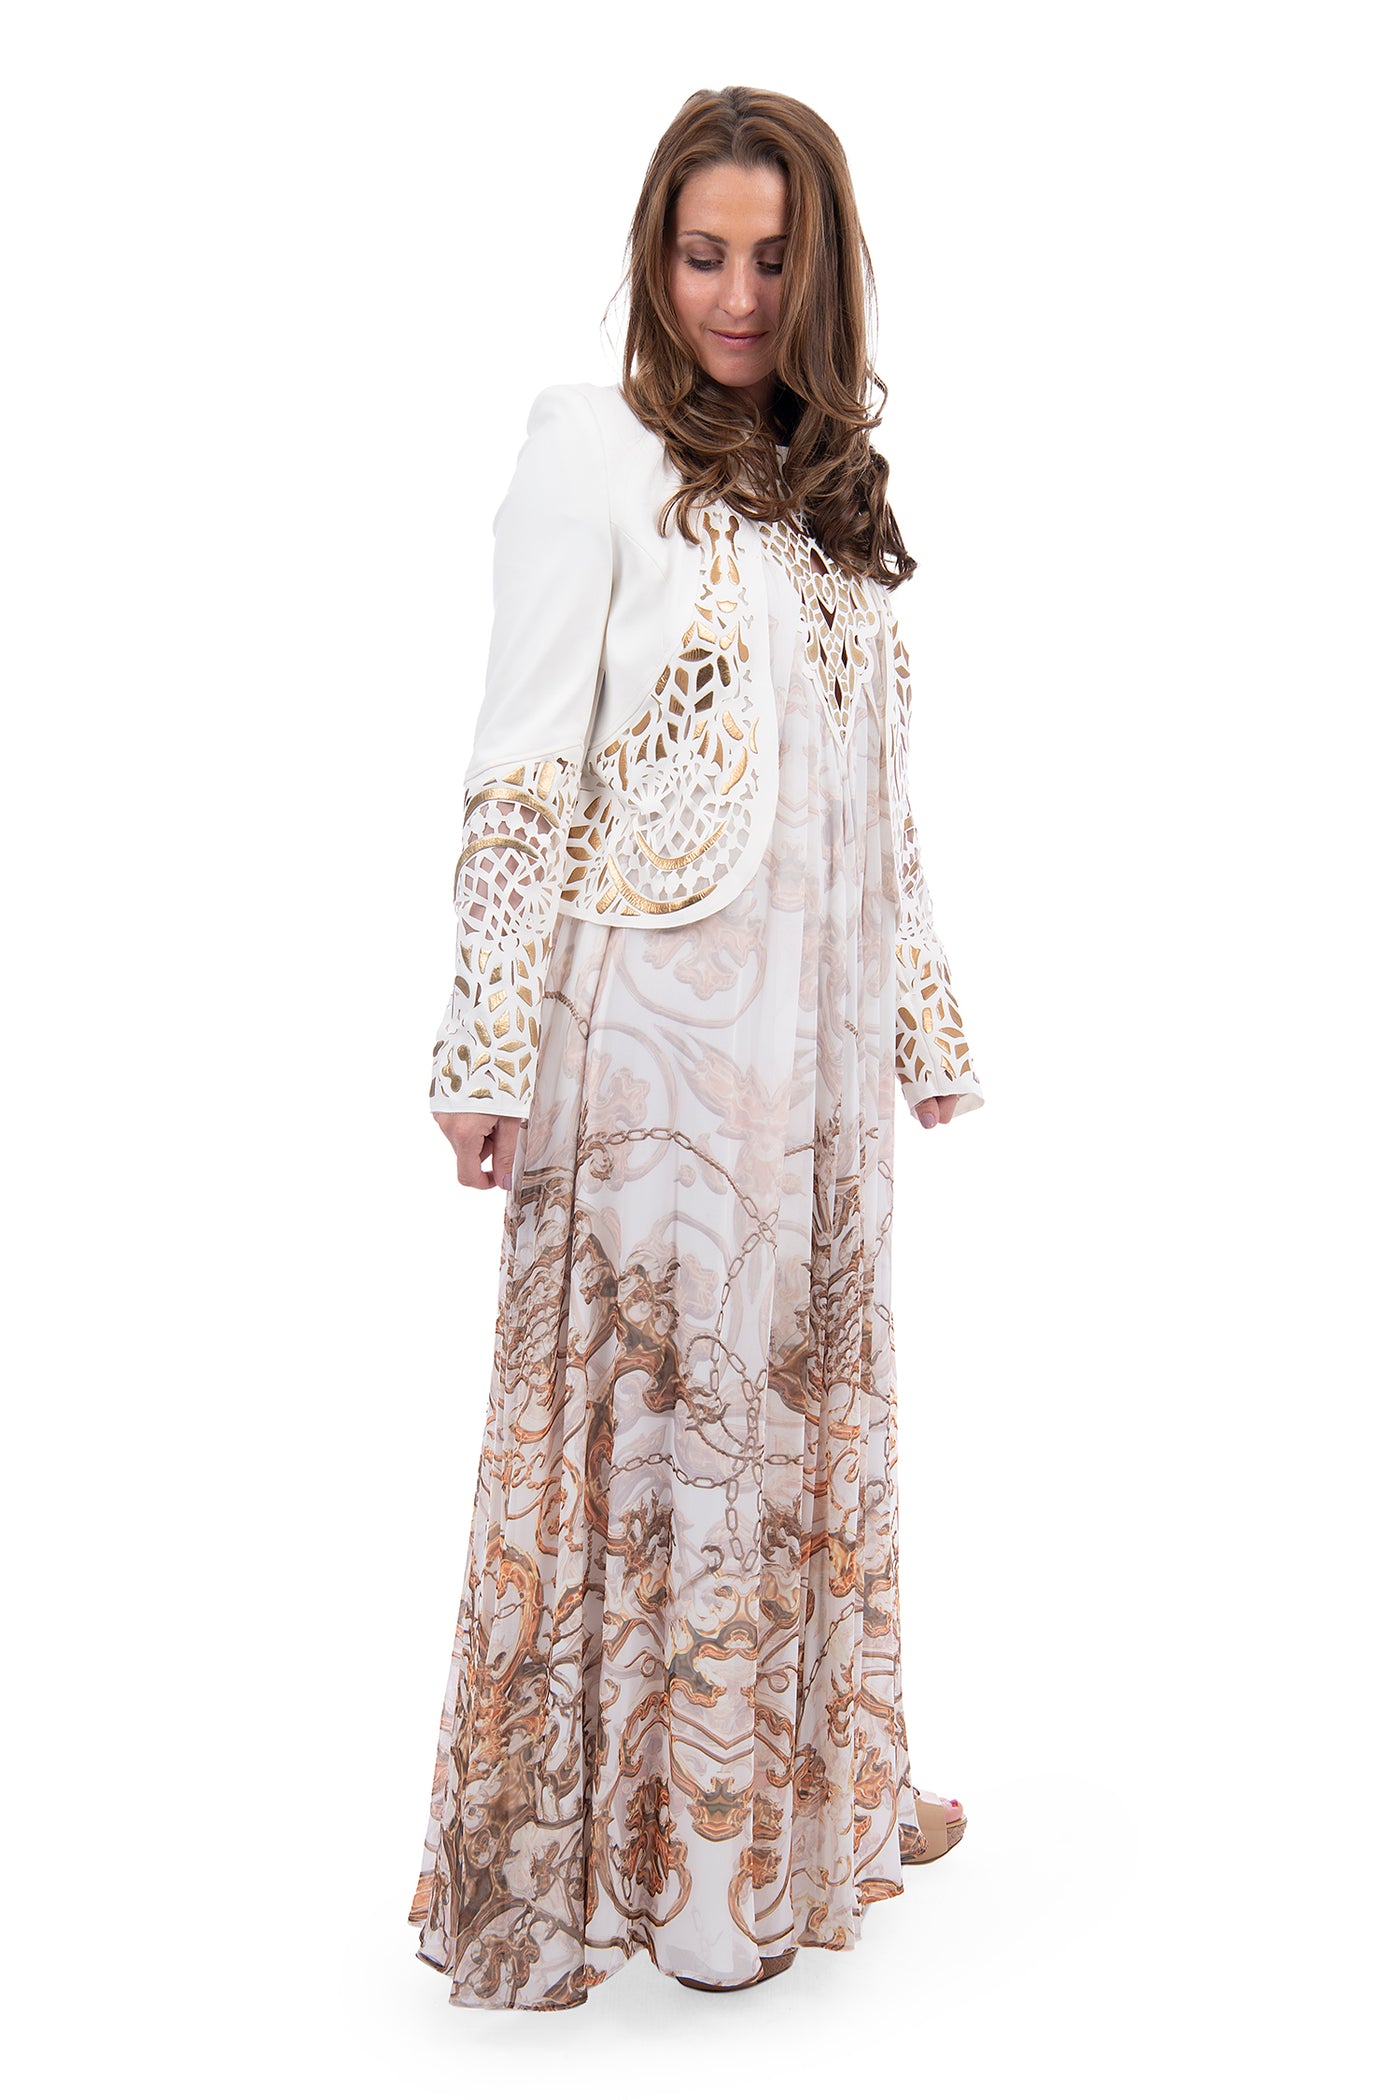 Baby 21  vintage cream and gold halter neck maxi dress + matching jacket